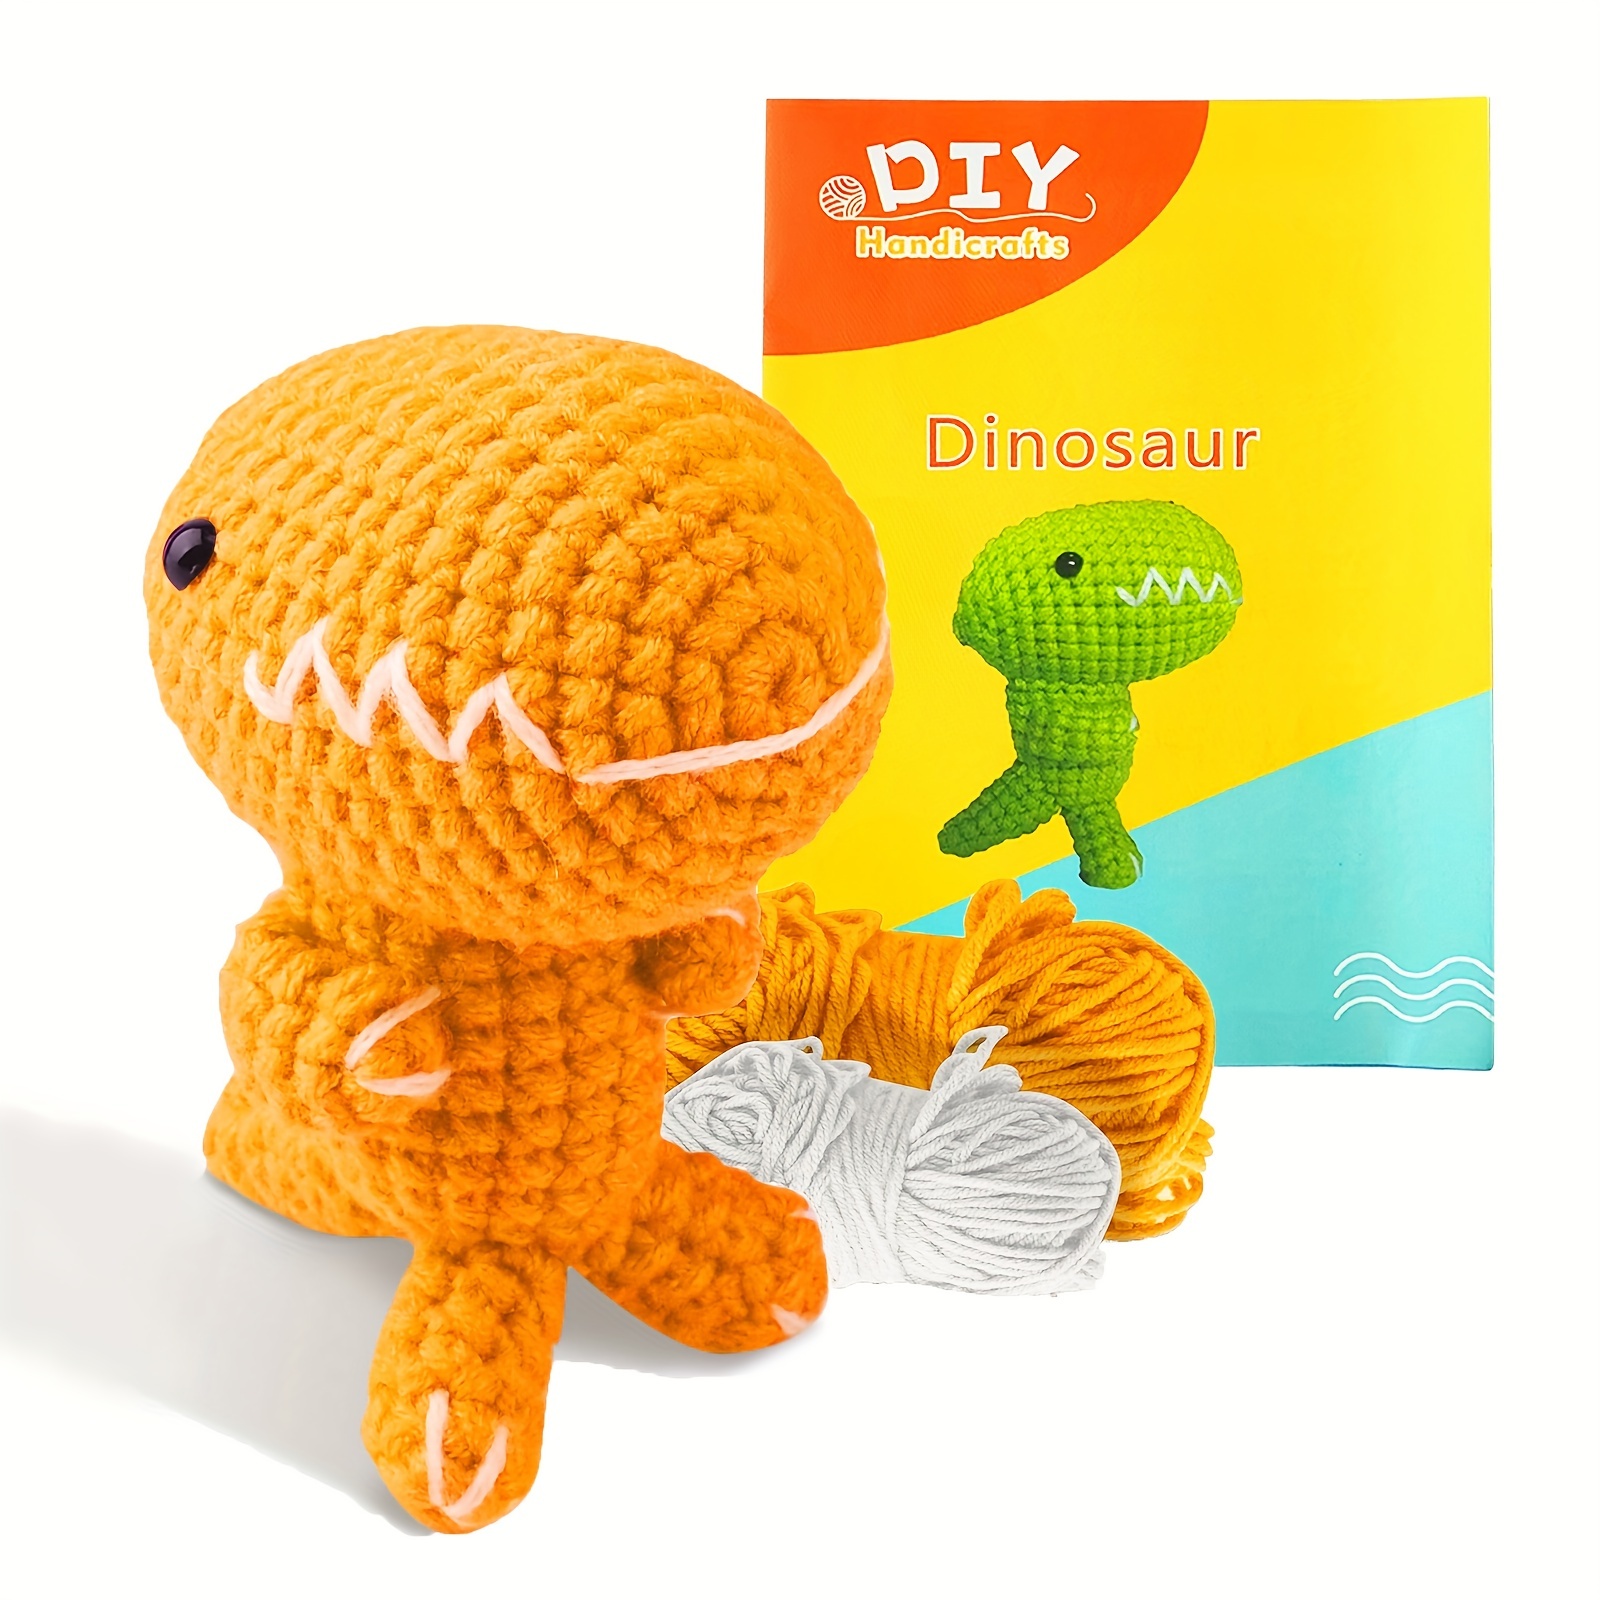 Bluethuy 1 Set Crochet Kit Amazing Easy Crochet with Step-by-Step